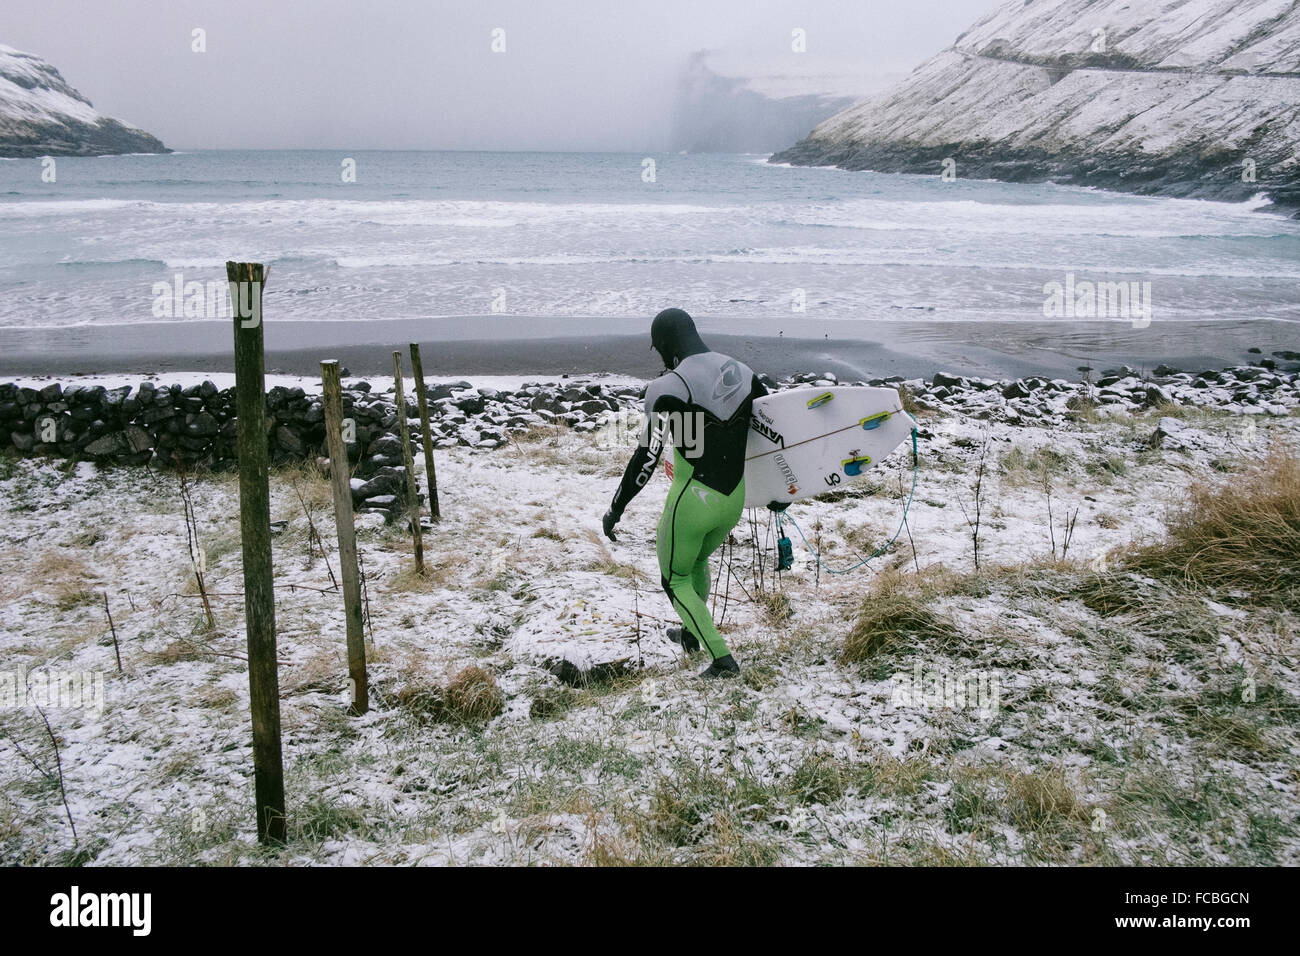 Pro surfer Indar Unanue on his way to the water in the Faroe Islands Stock Photo